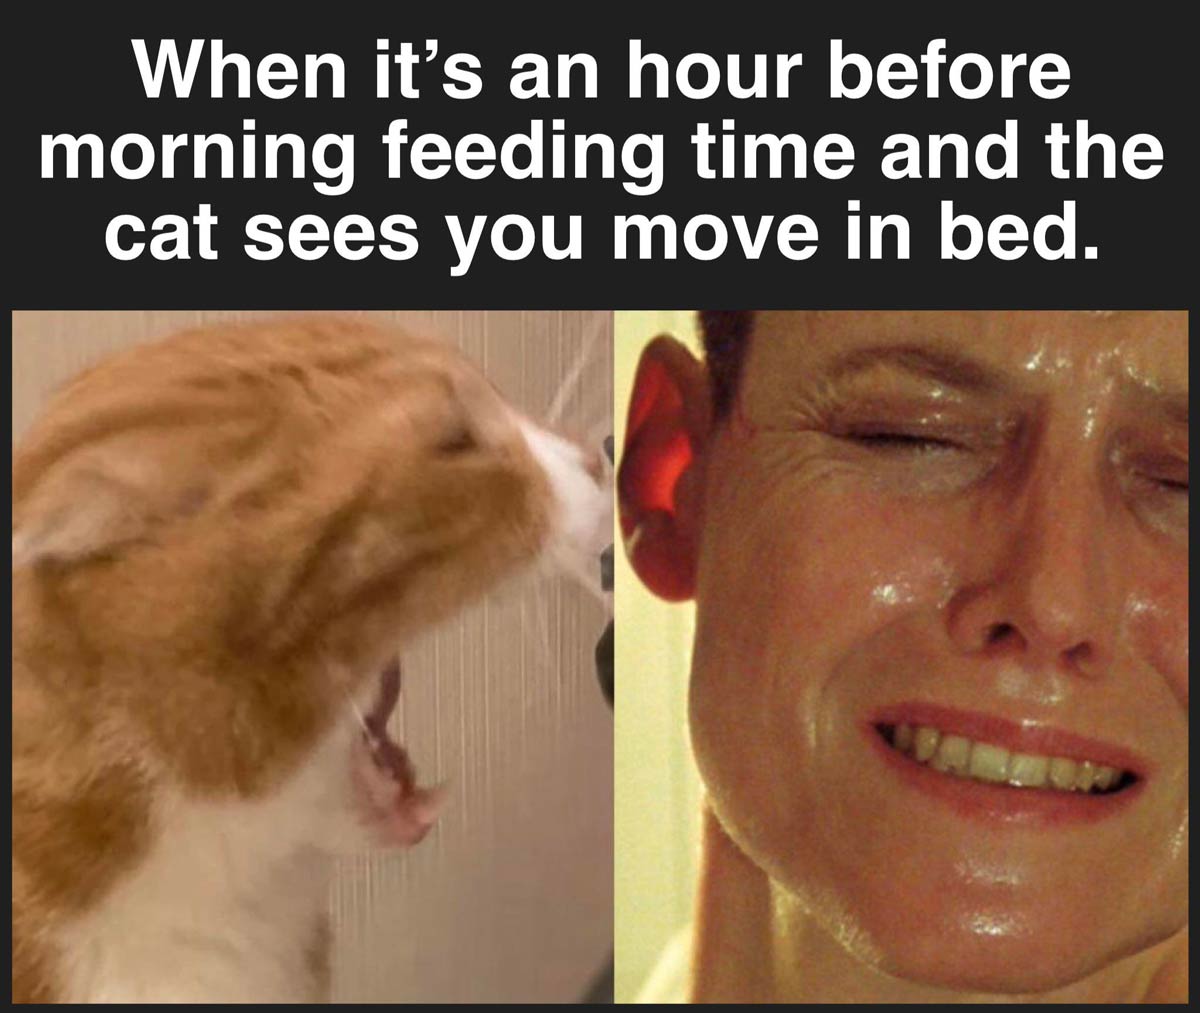 When the cat sees you move in bed